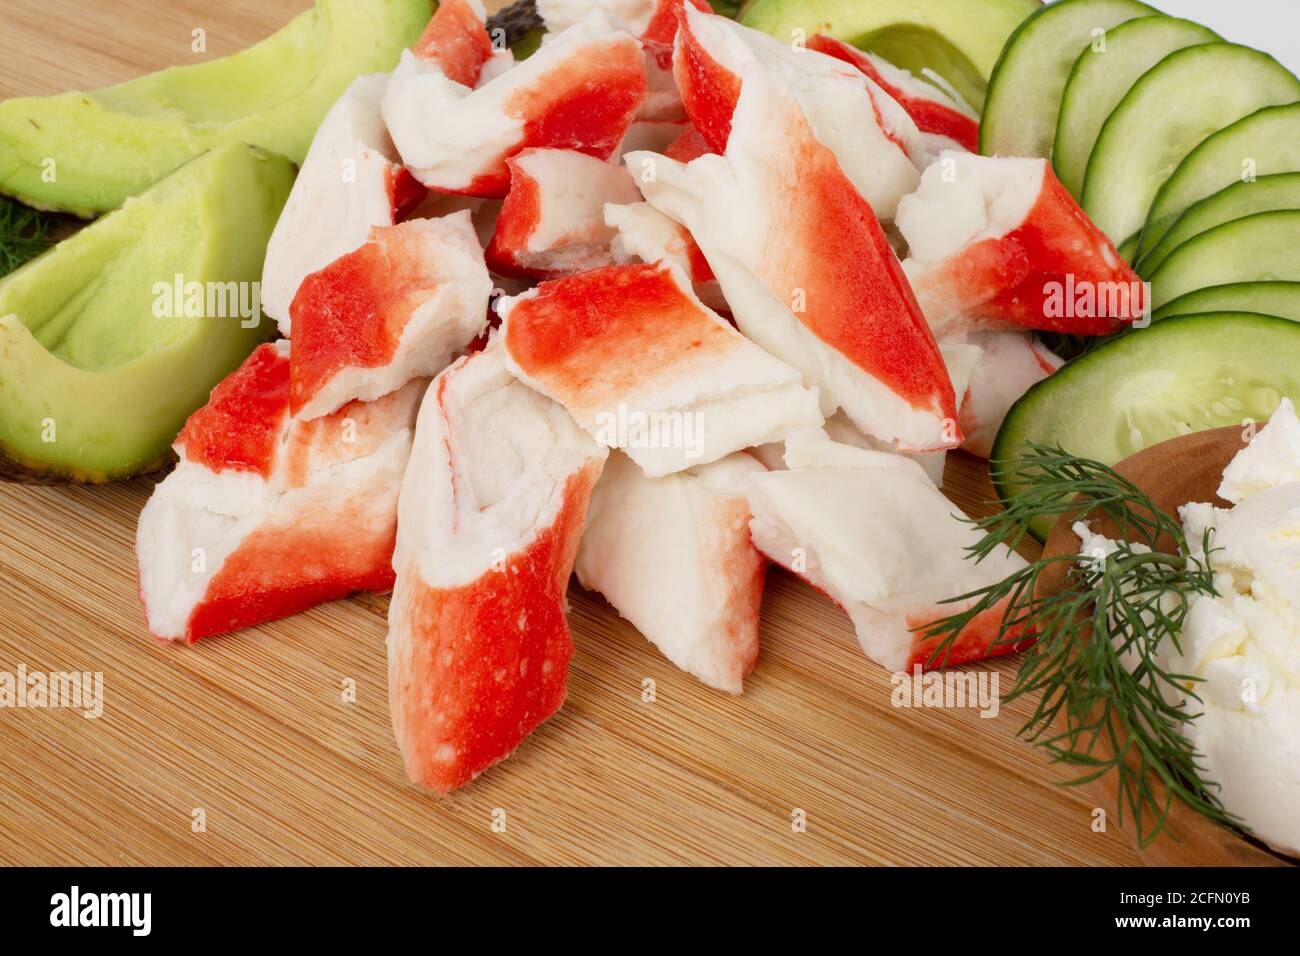 Crab sticks cut meat and vegetables avocado cut cucumbers on wooden cutting board close up Stock Photo